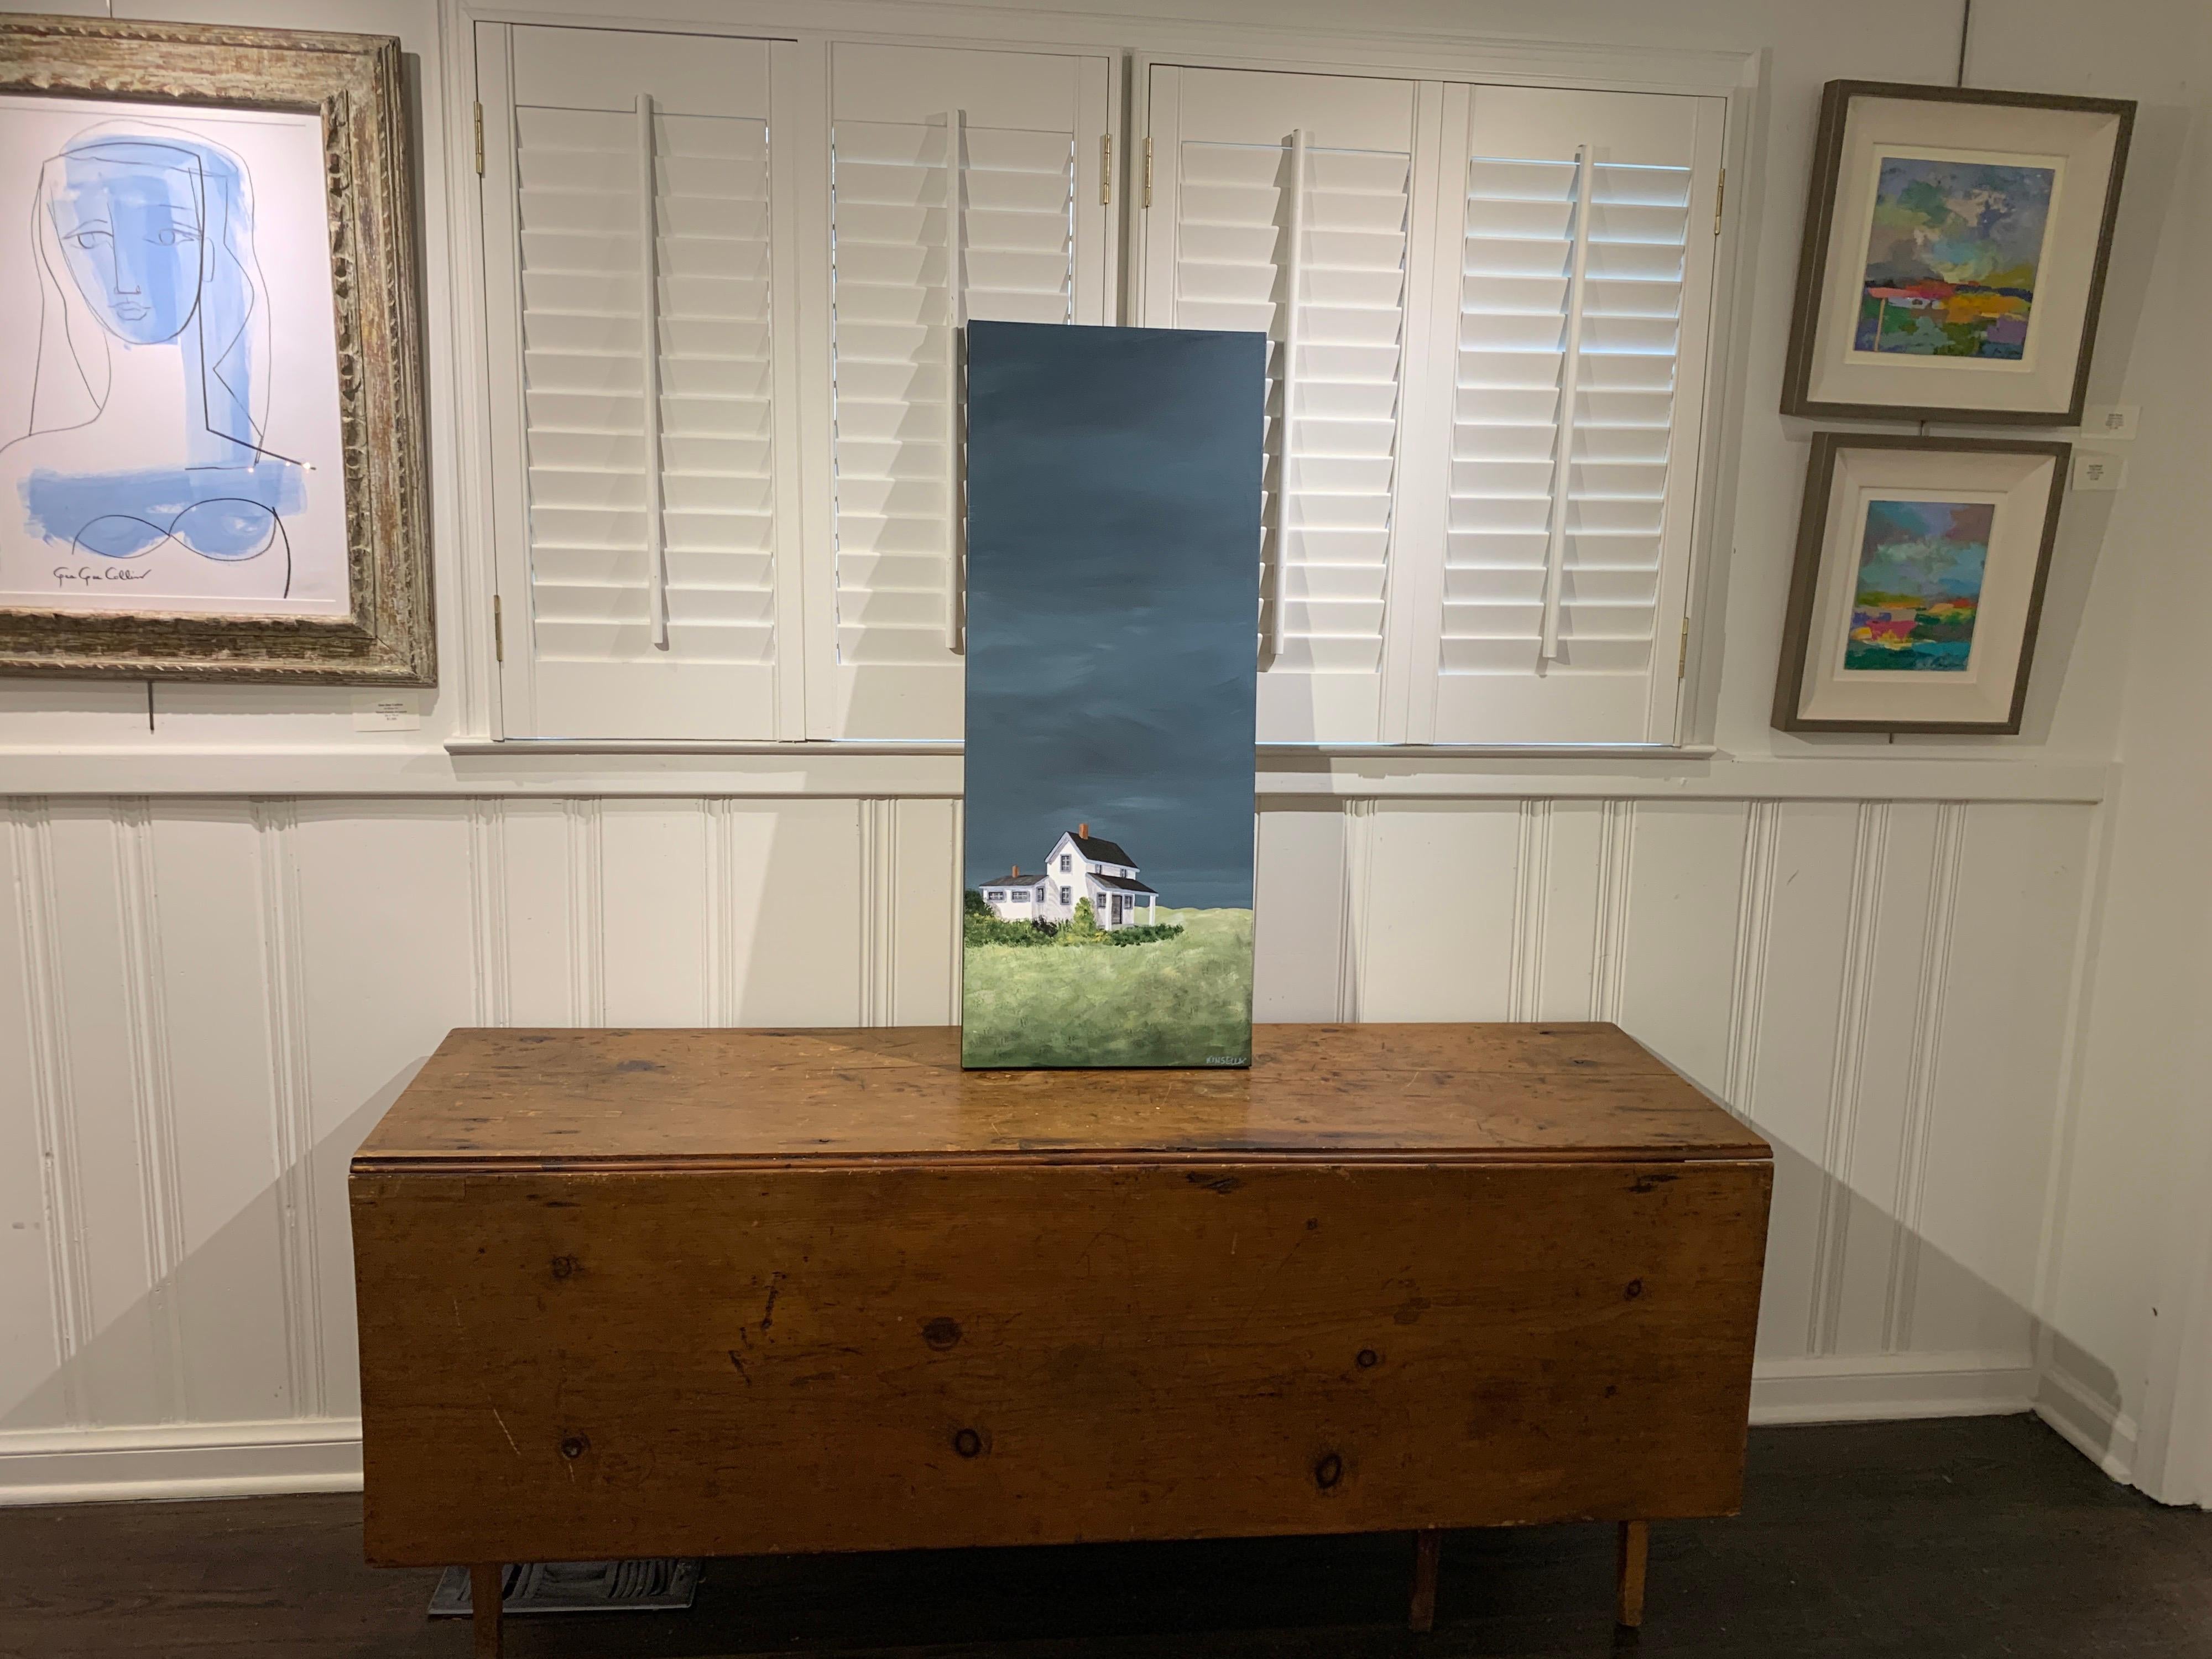 Respite Cottage by Susan Kinsella, vertical contemporary landscape painting 1